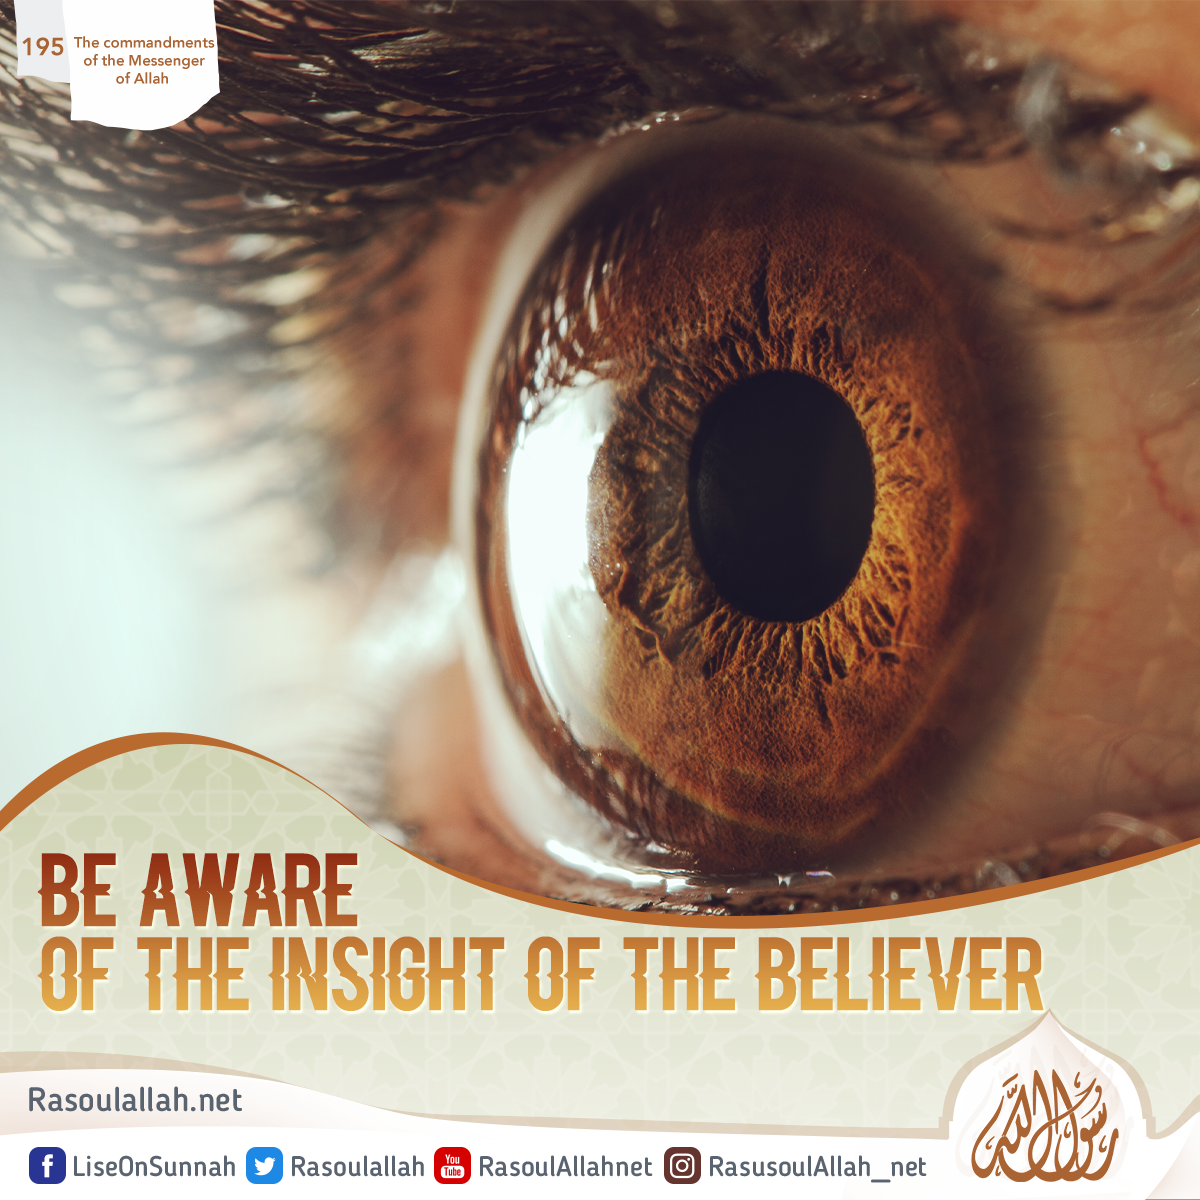 Be aware of the insight of the believer